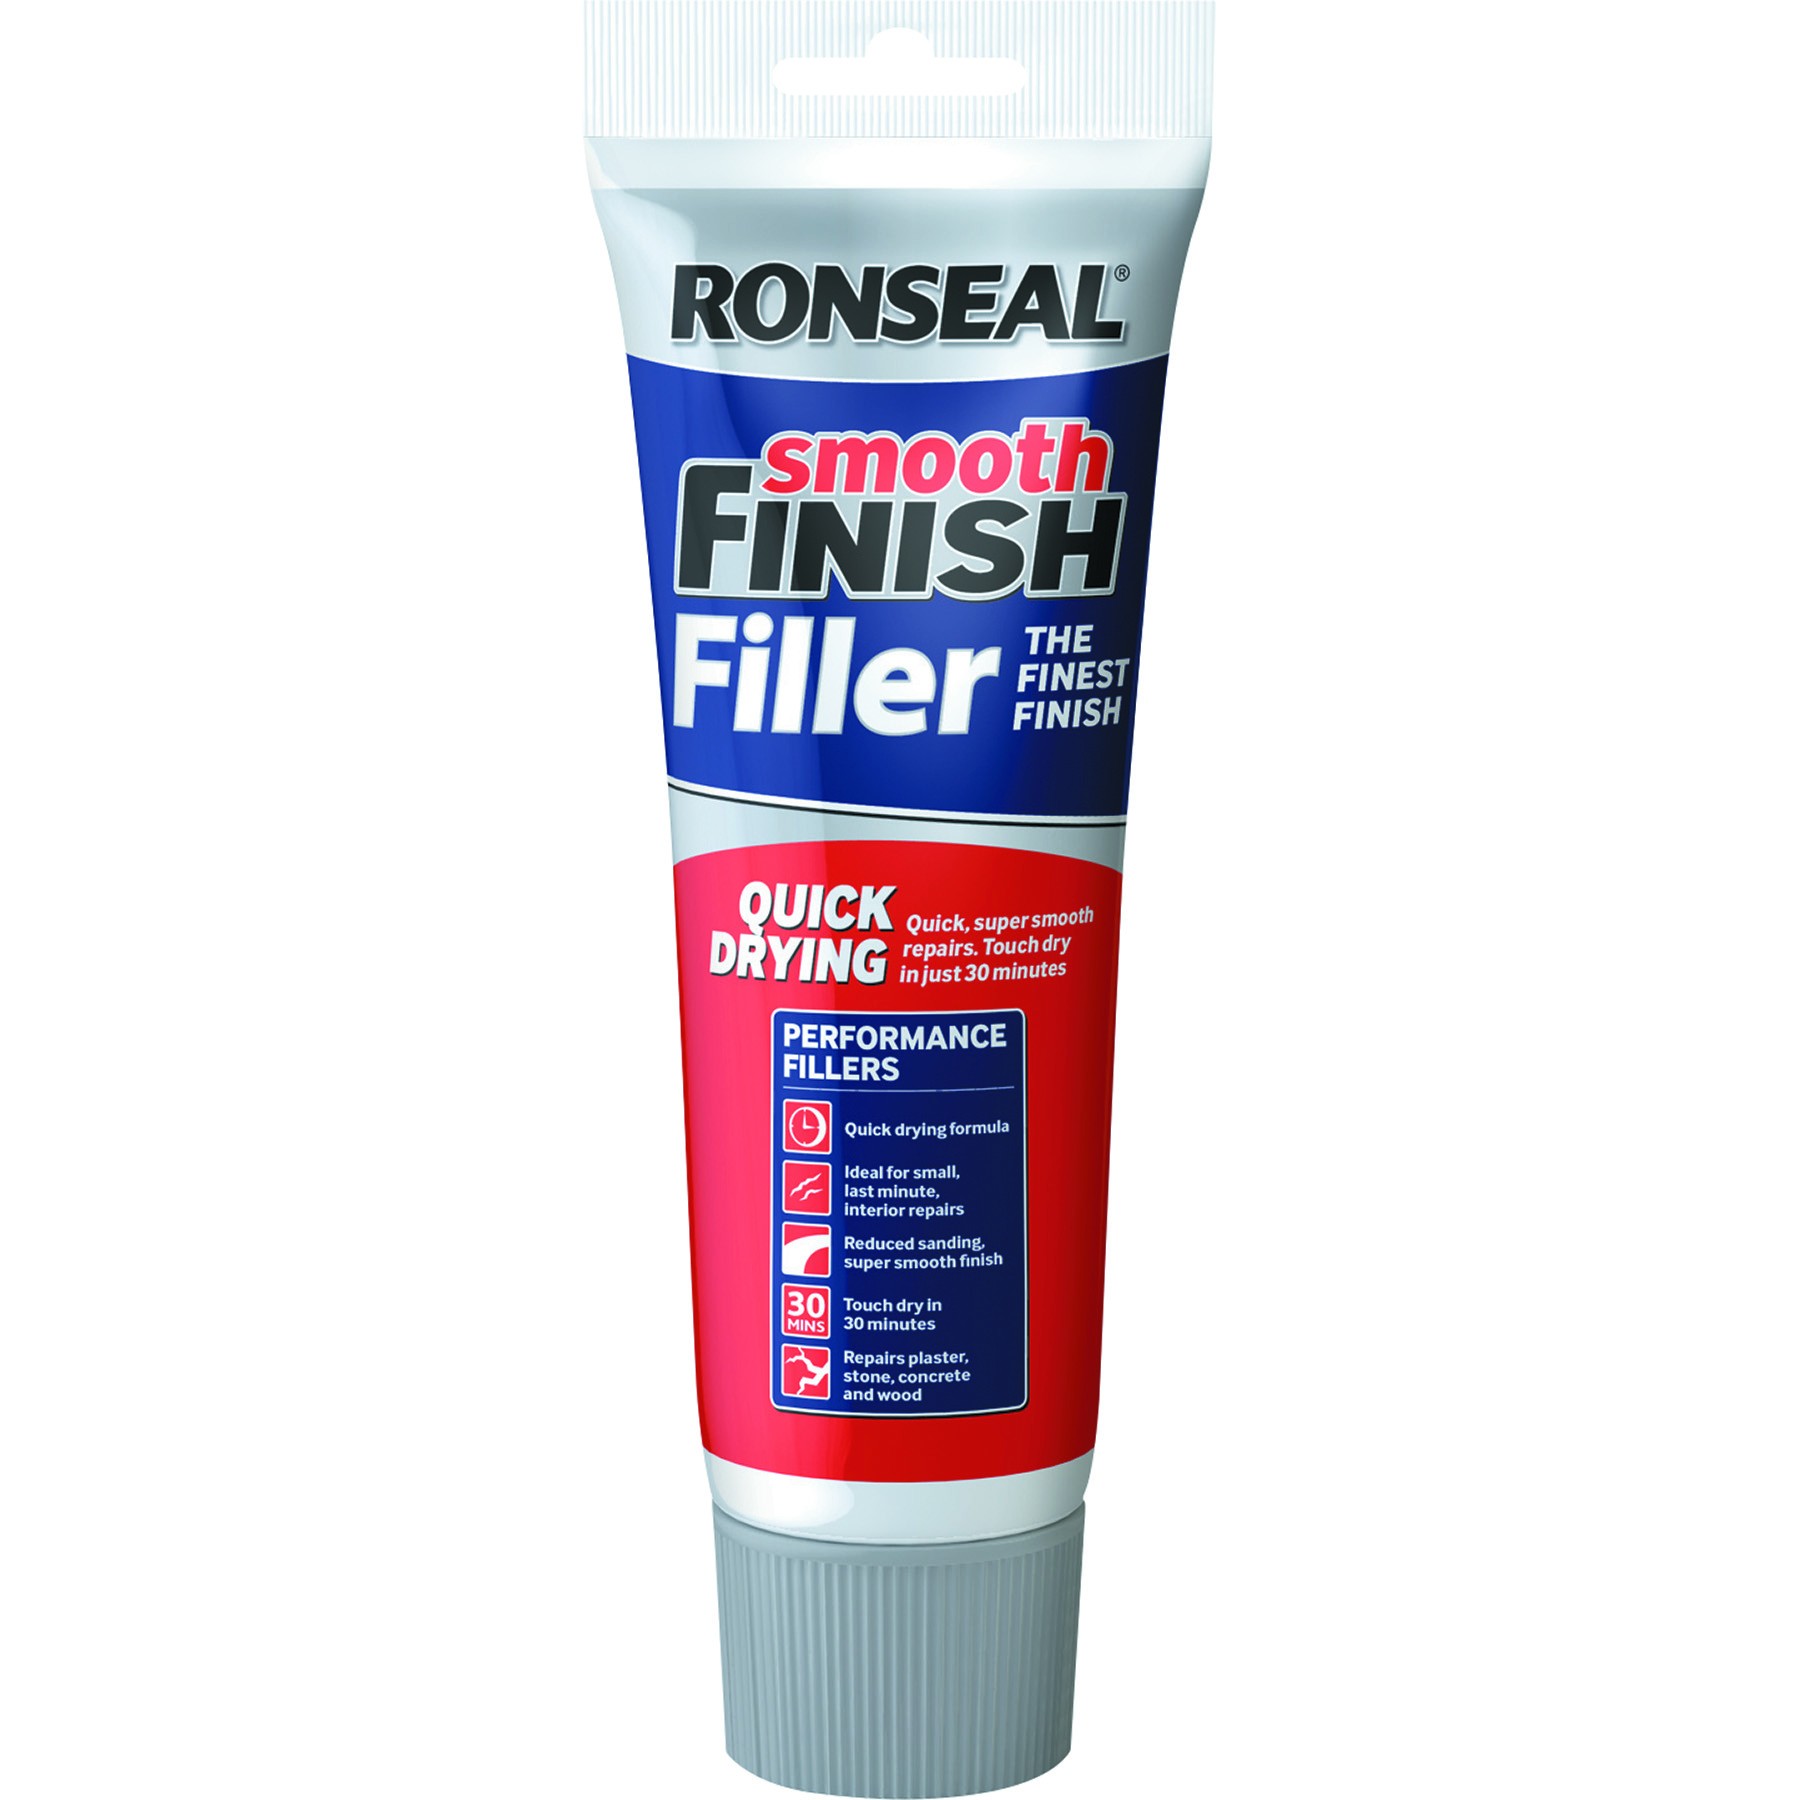 Ronseal Smooth Finish Quick Drying Wall Filler 330g [RONS36552]